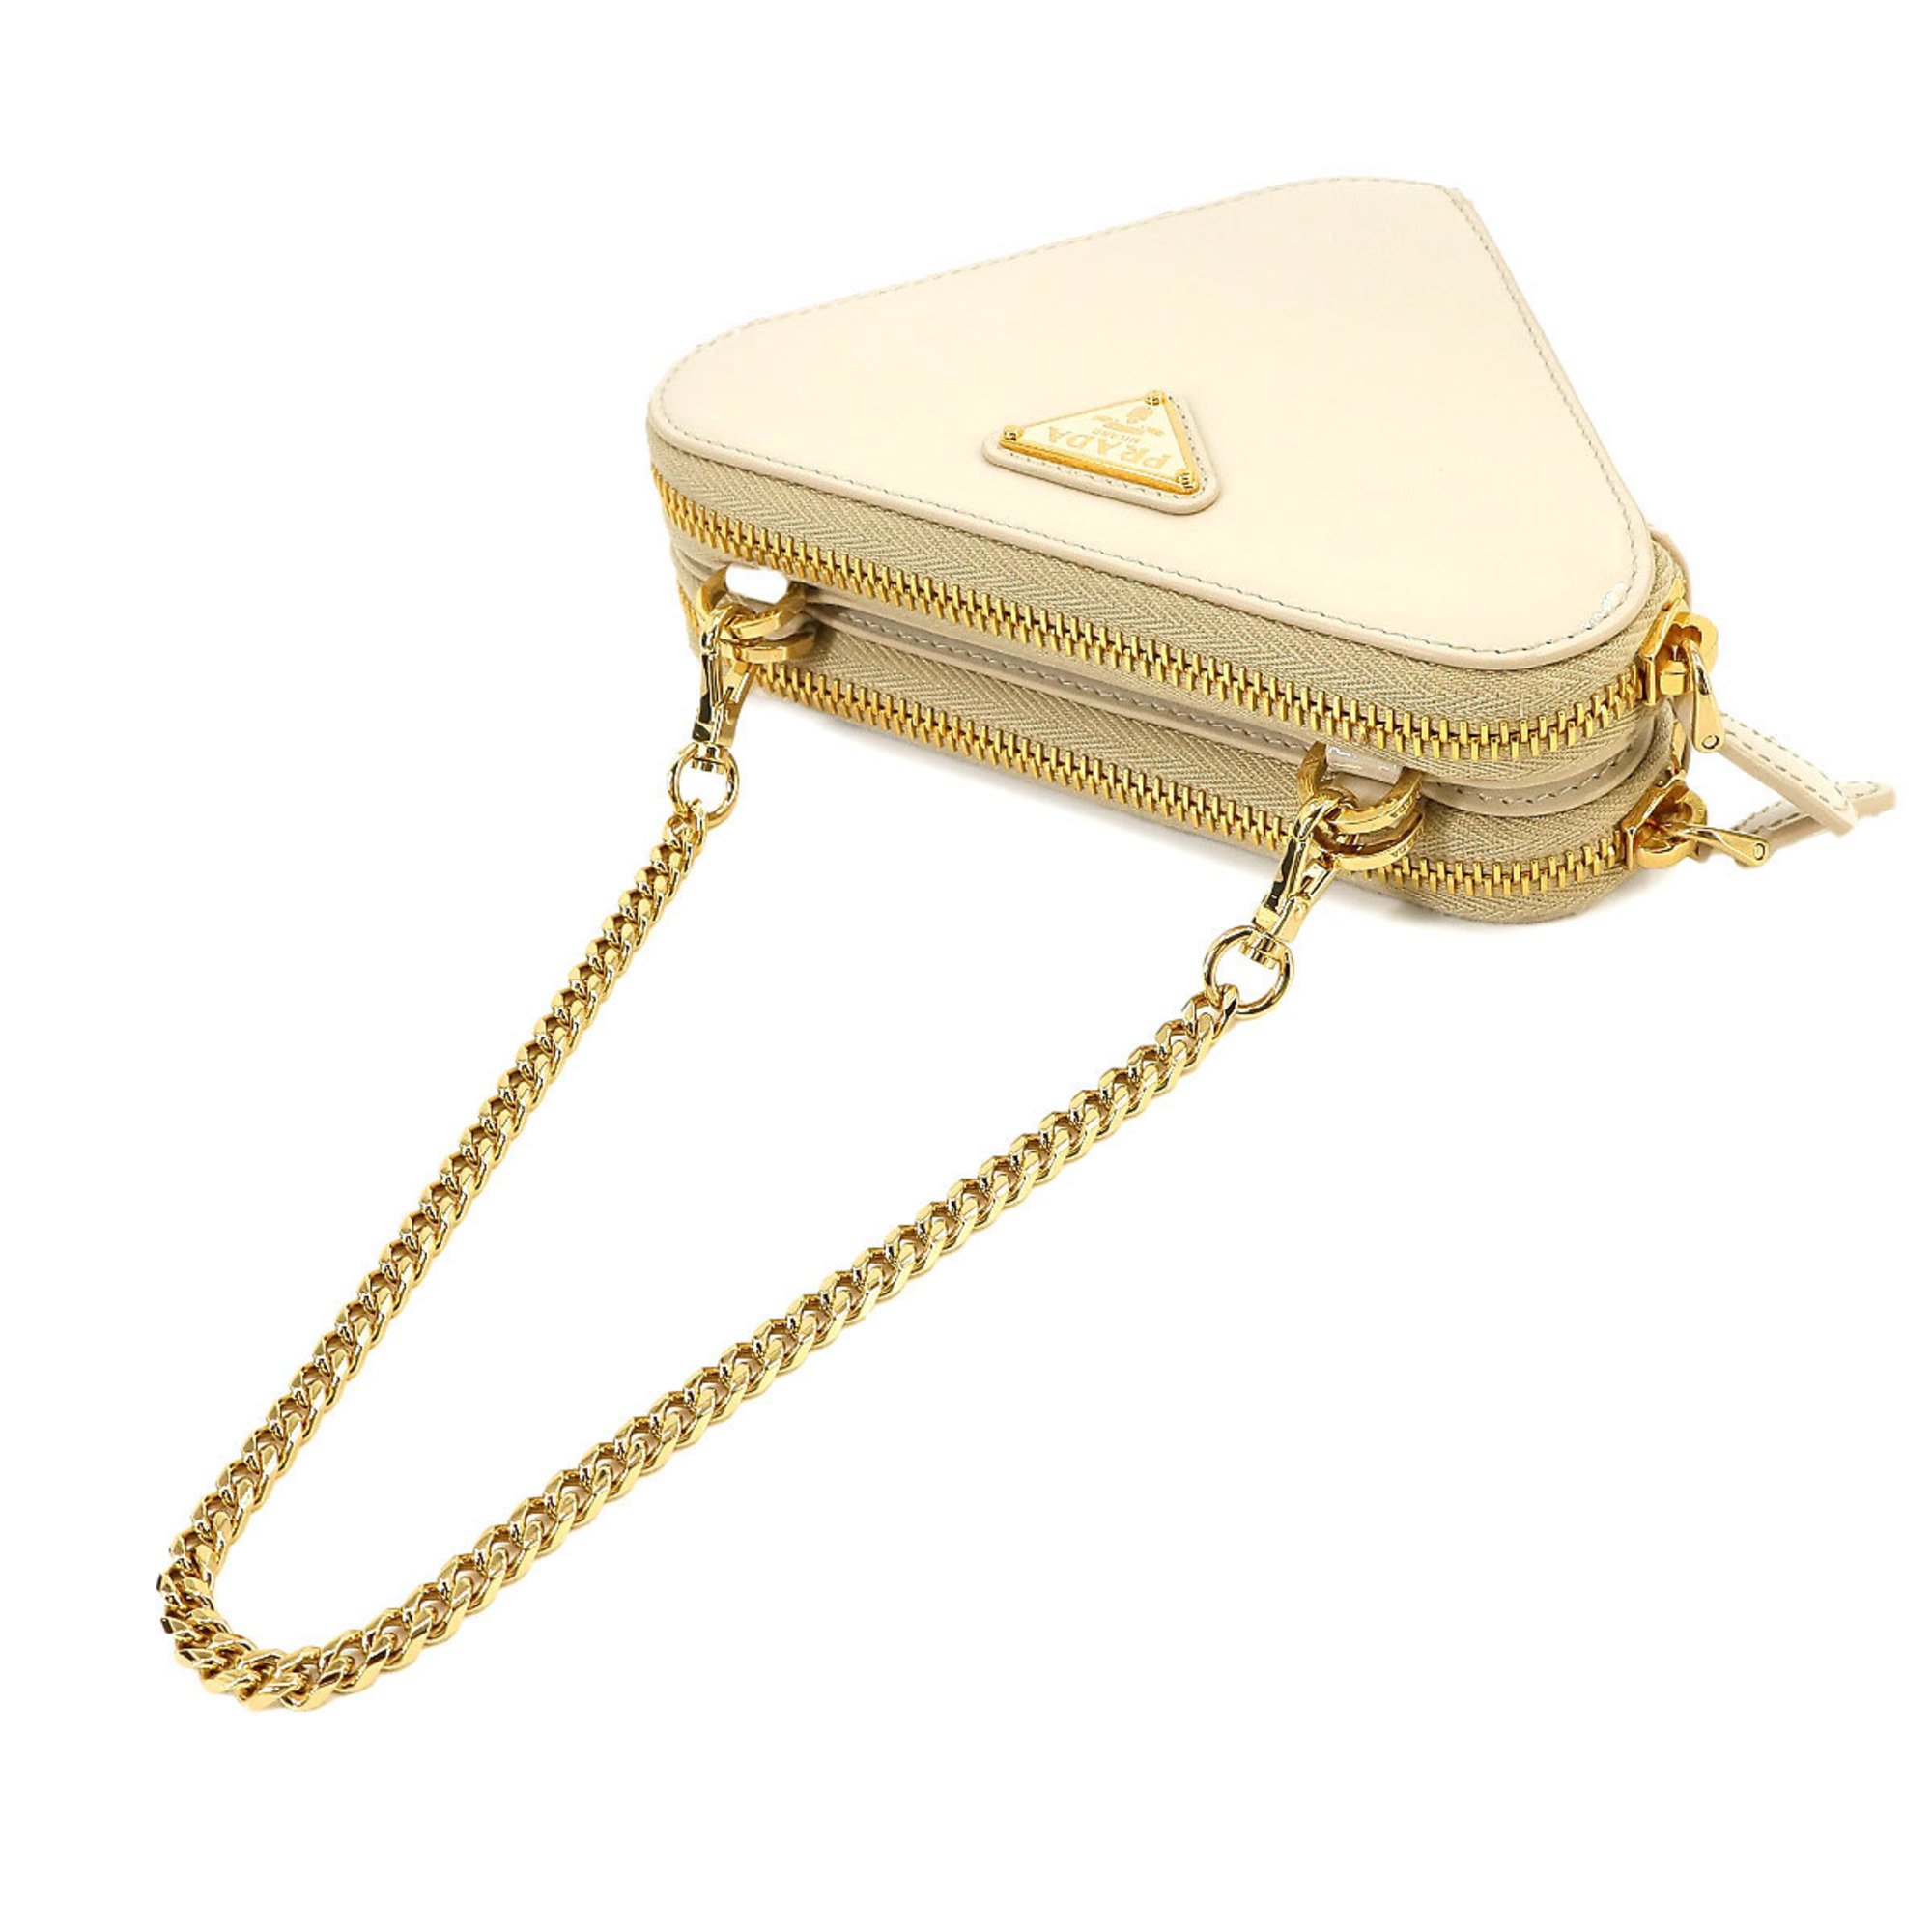 PRADA Triangle Pouch 2way Hand Shoulder Bag Patent Leather Ivory 1NR015 Mini